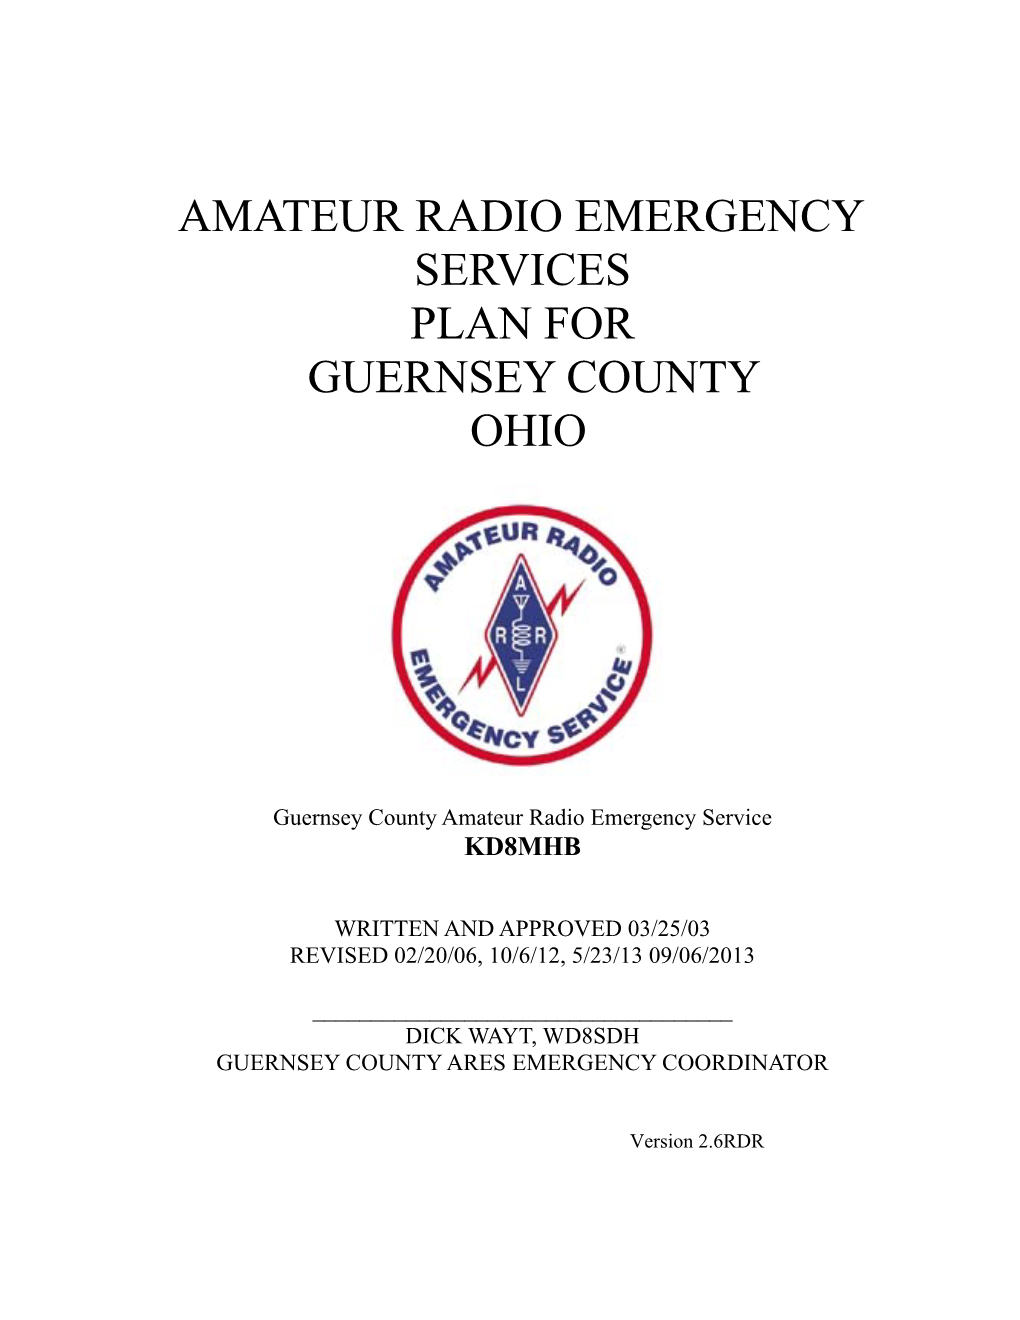 Amateur Radio Emergency Services Plan for Guernsey County Ohio